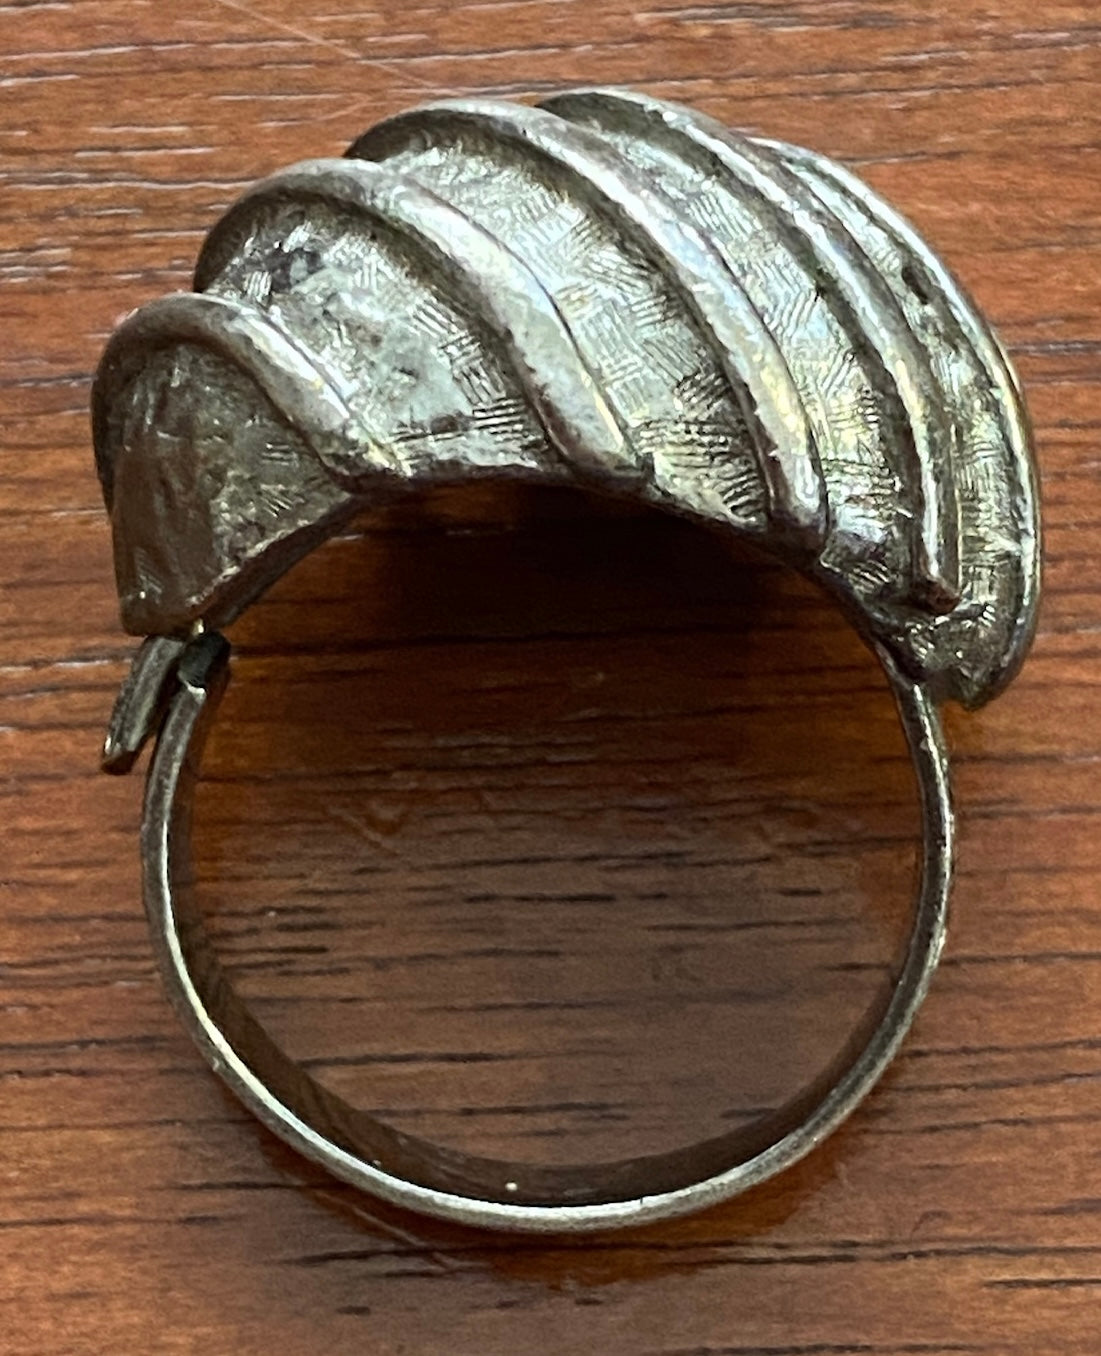 Vintage Costume Silver Tone Bombe Cocktail Ring Adjustable Sz 7